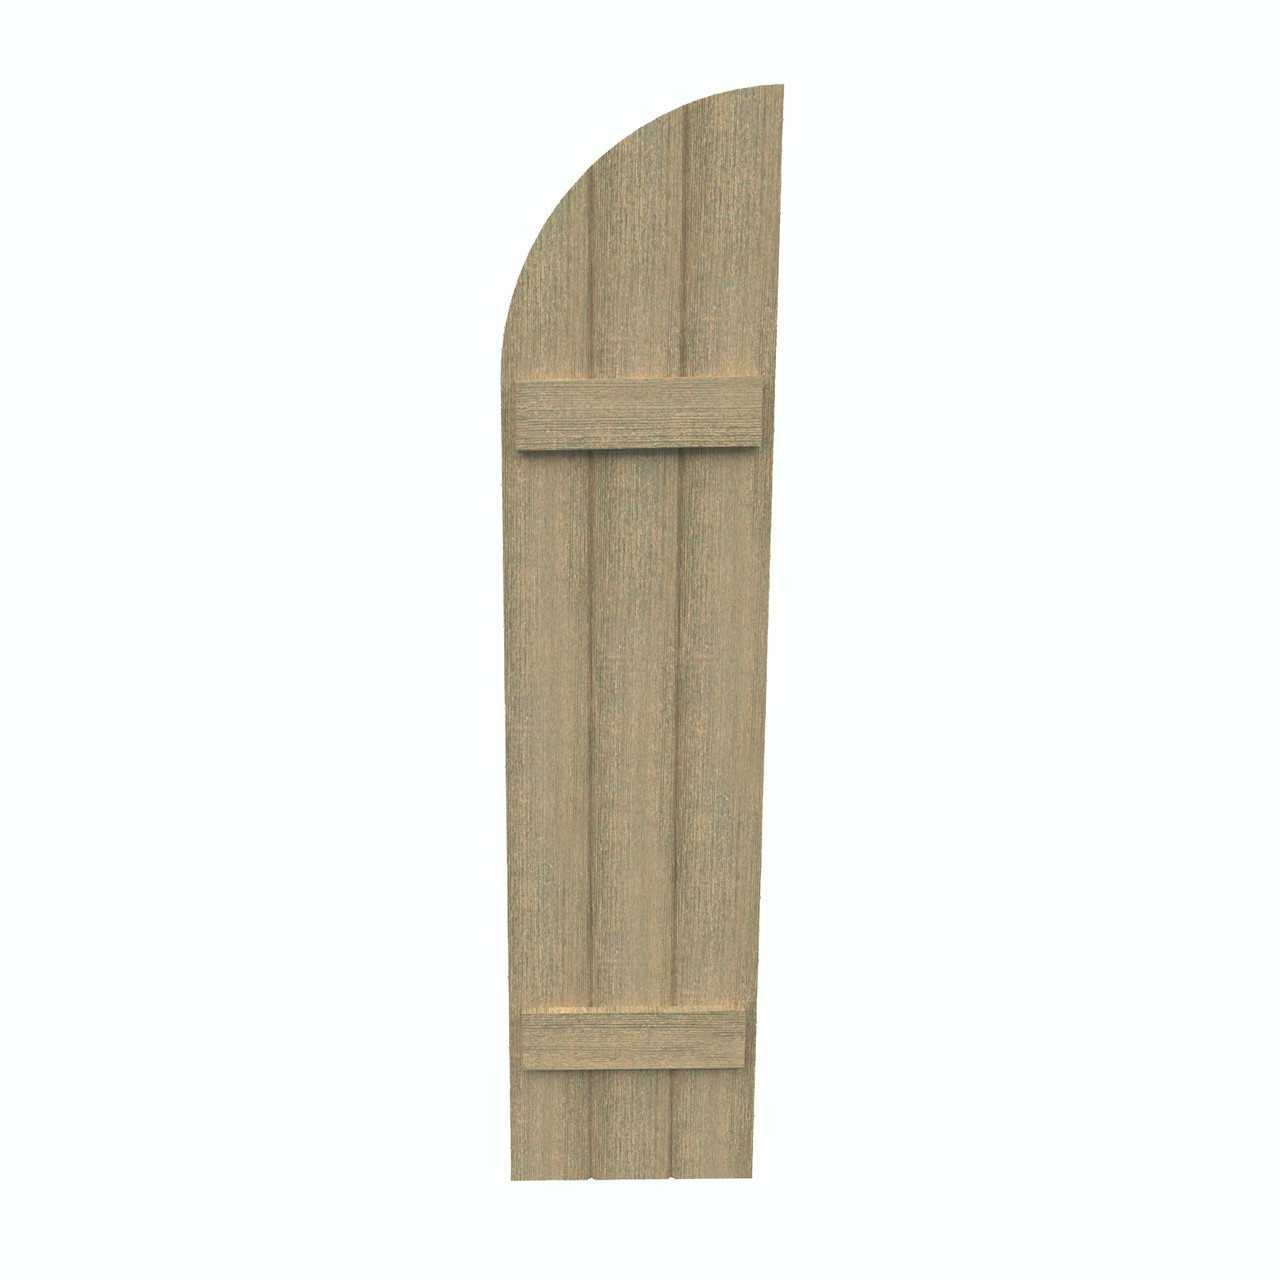 18 inch by 99 inch Quarter Round Shutter with 3-Boards